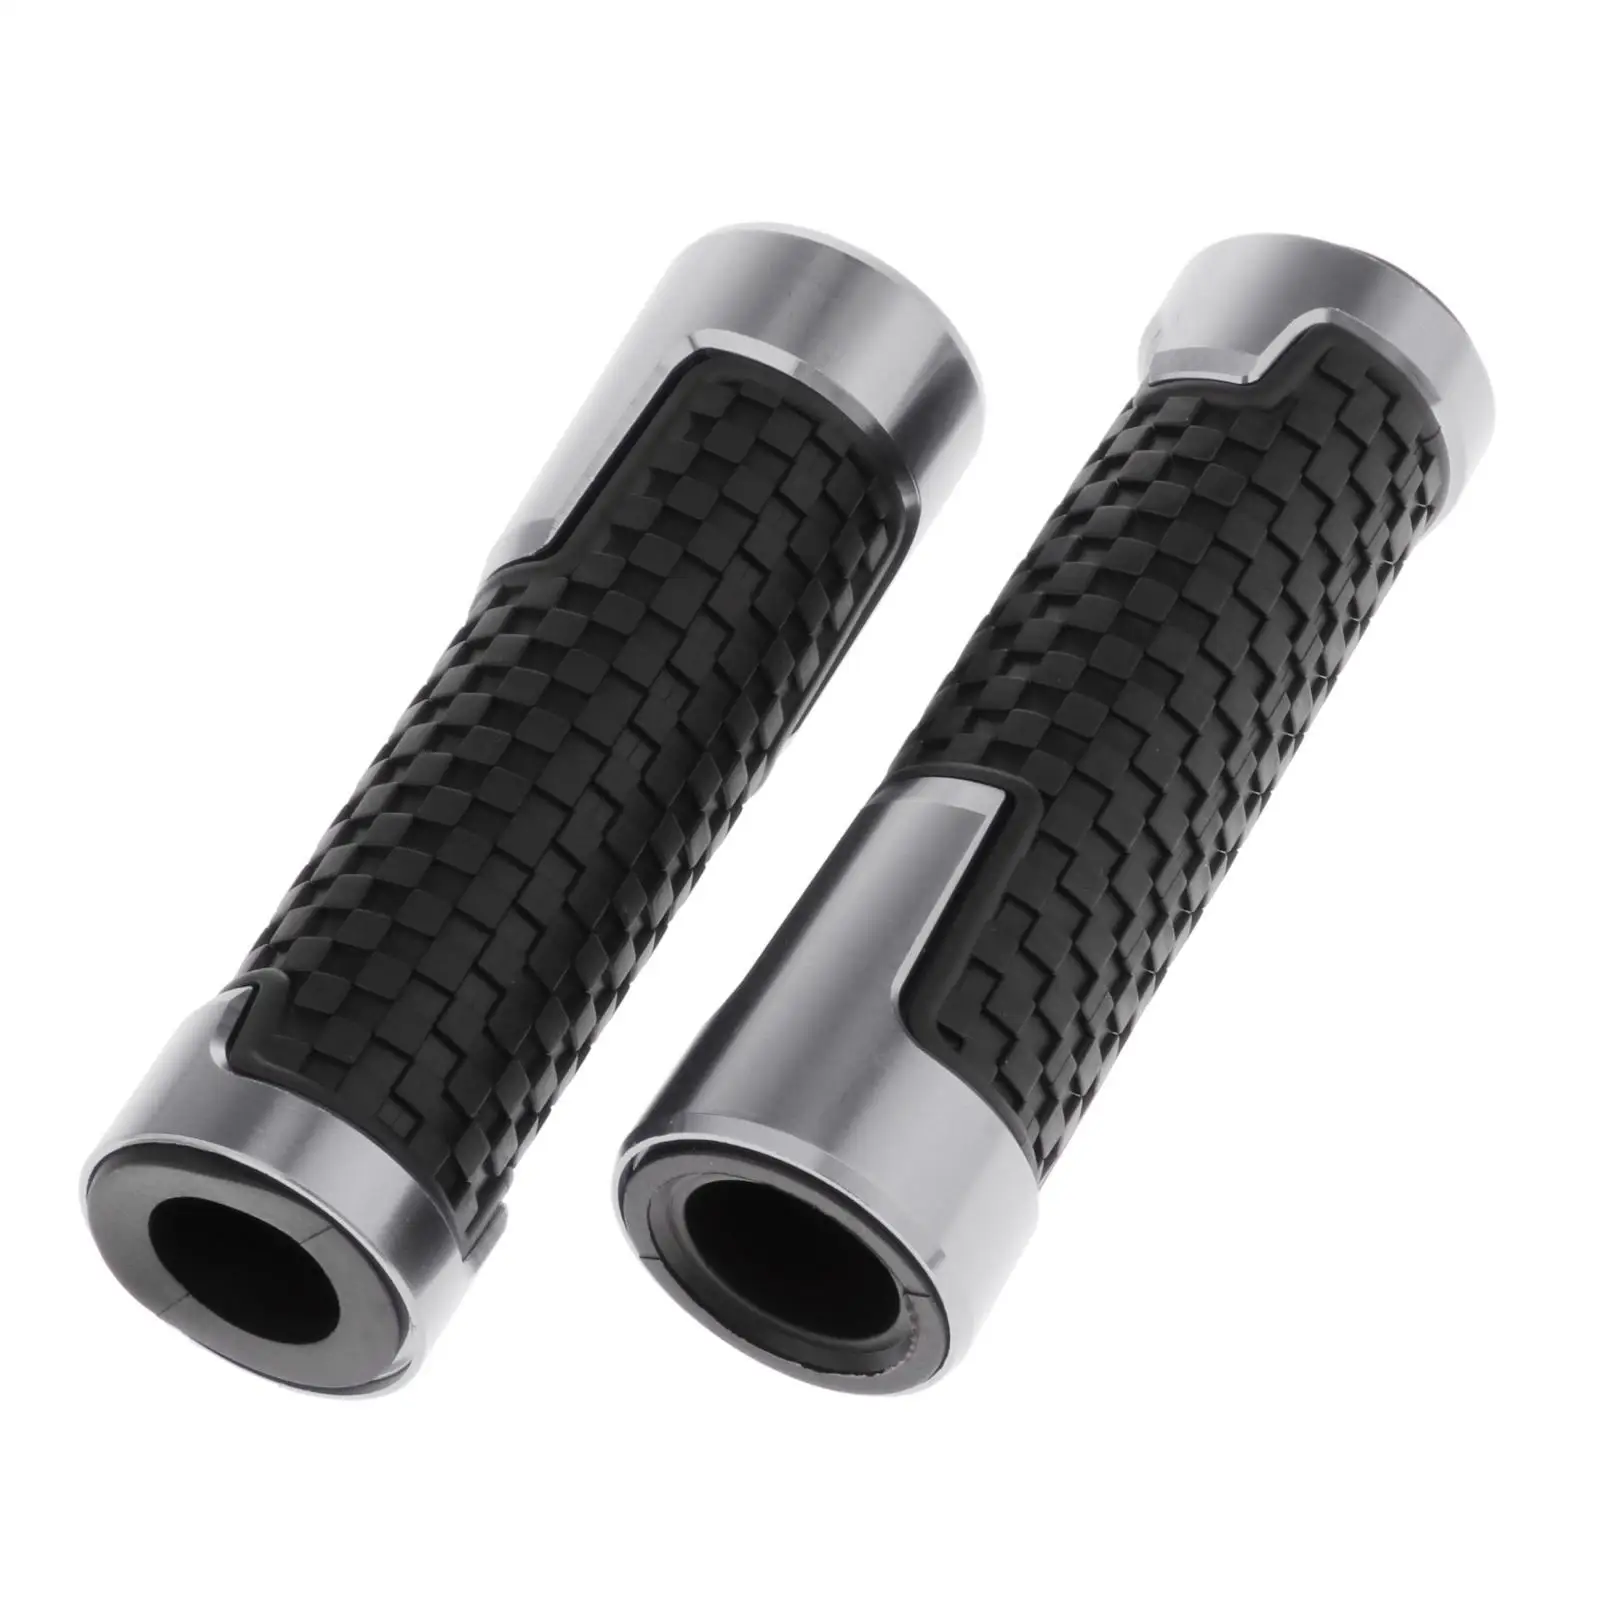 2x Motorcycle Hand Grips Motocycle Accessories Easily Replace Black/Golden